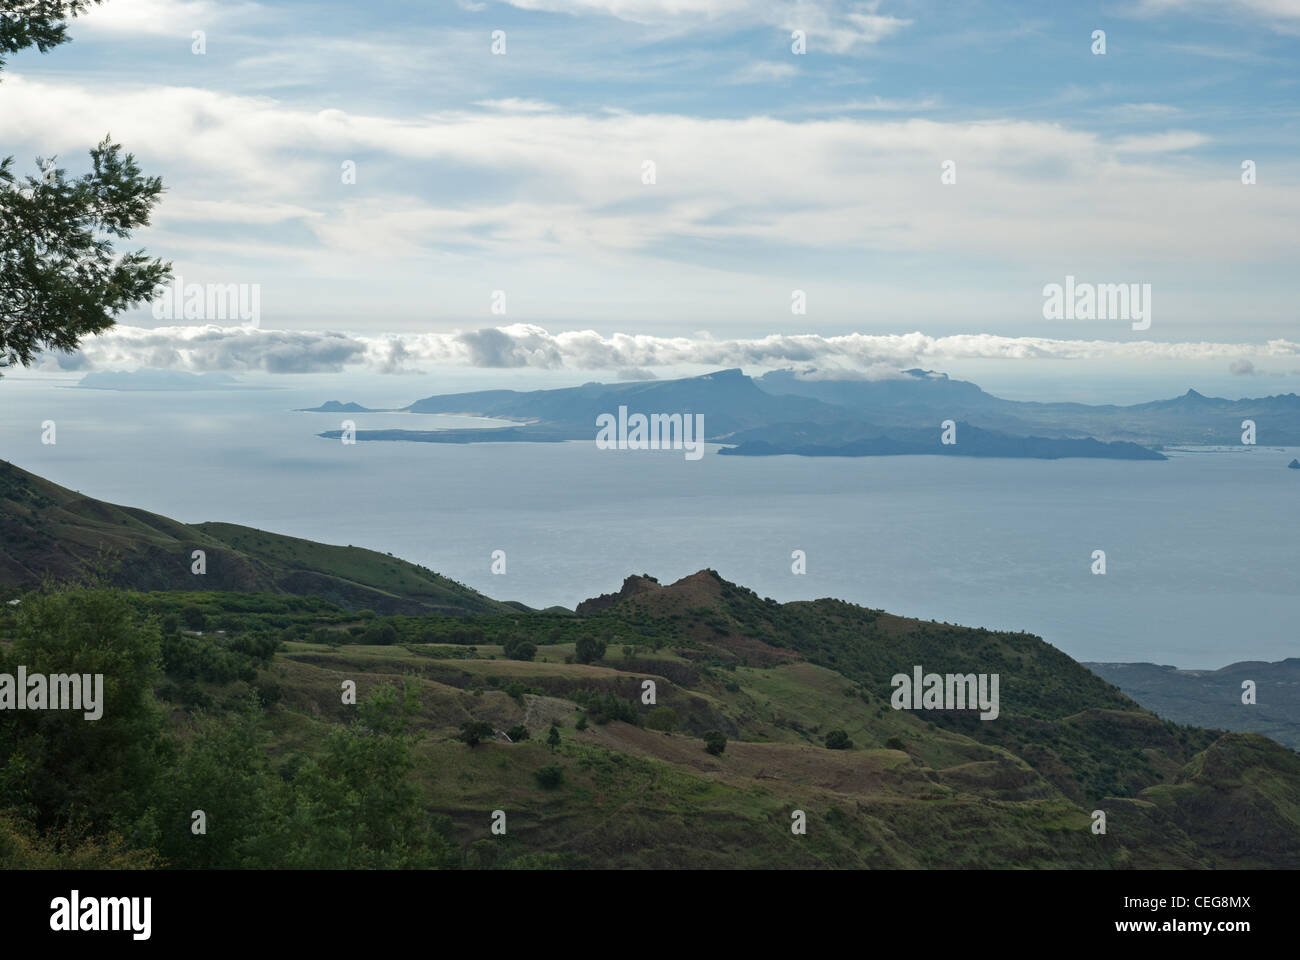 looking across the strait from Santo Antao to Sao Vicente Stock Photo